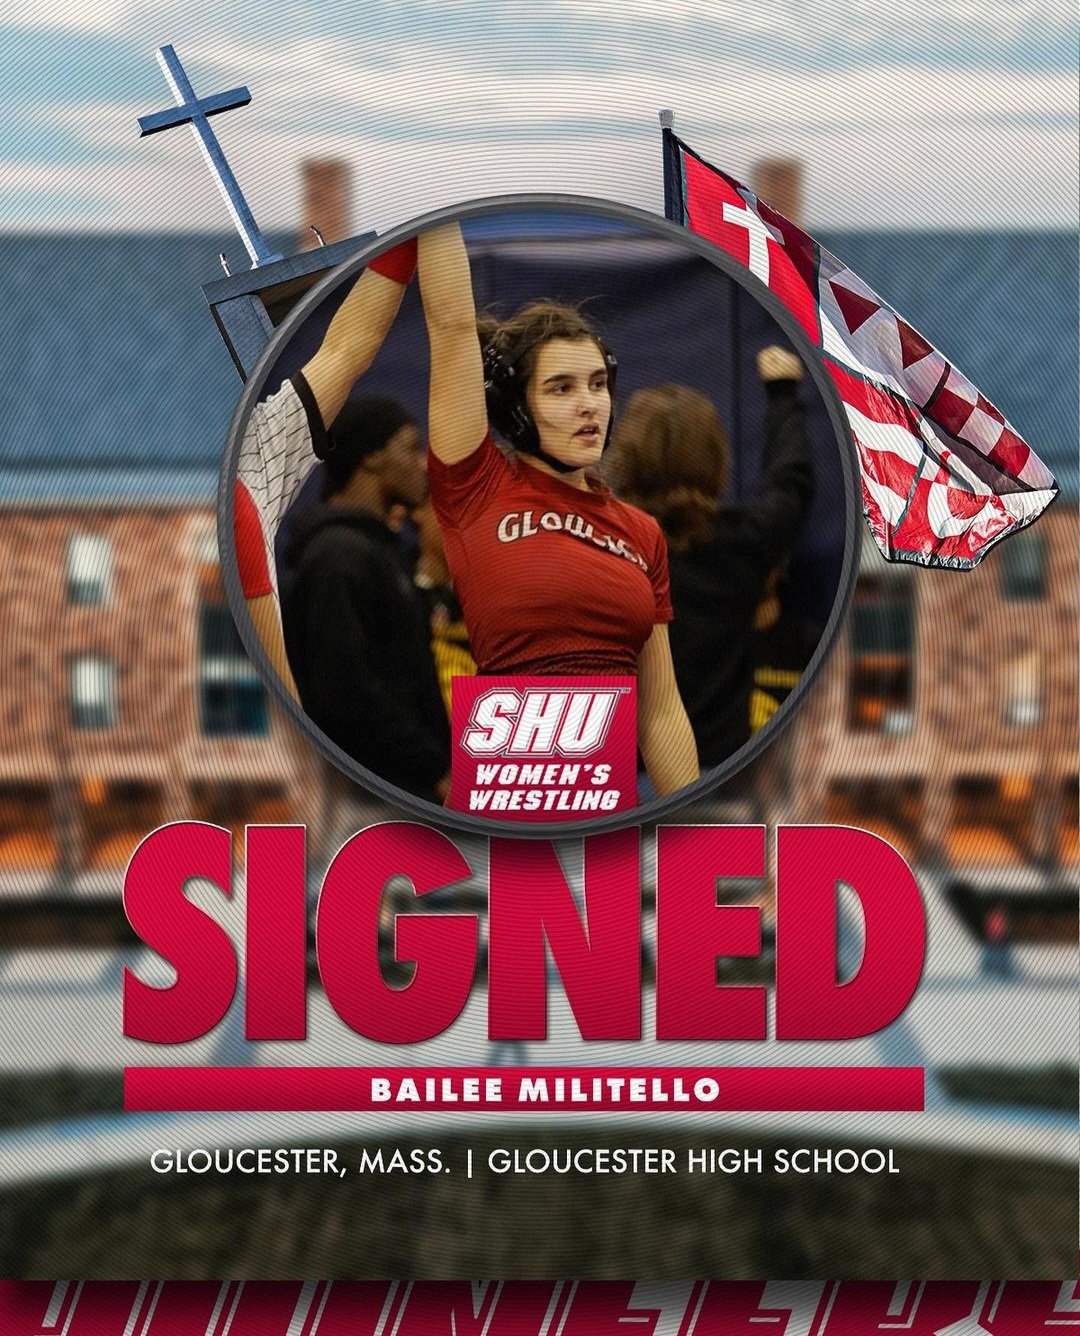 More information about "Bailey Militello"